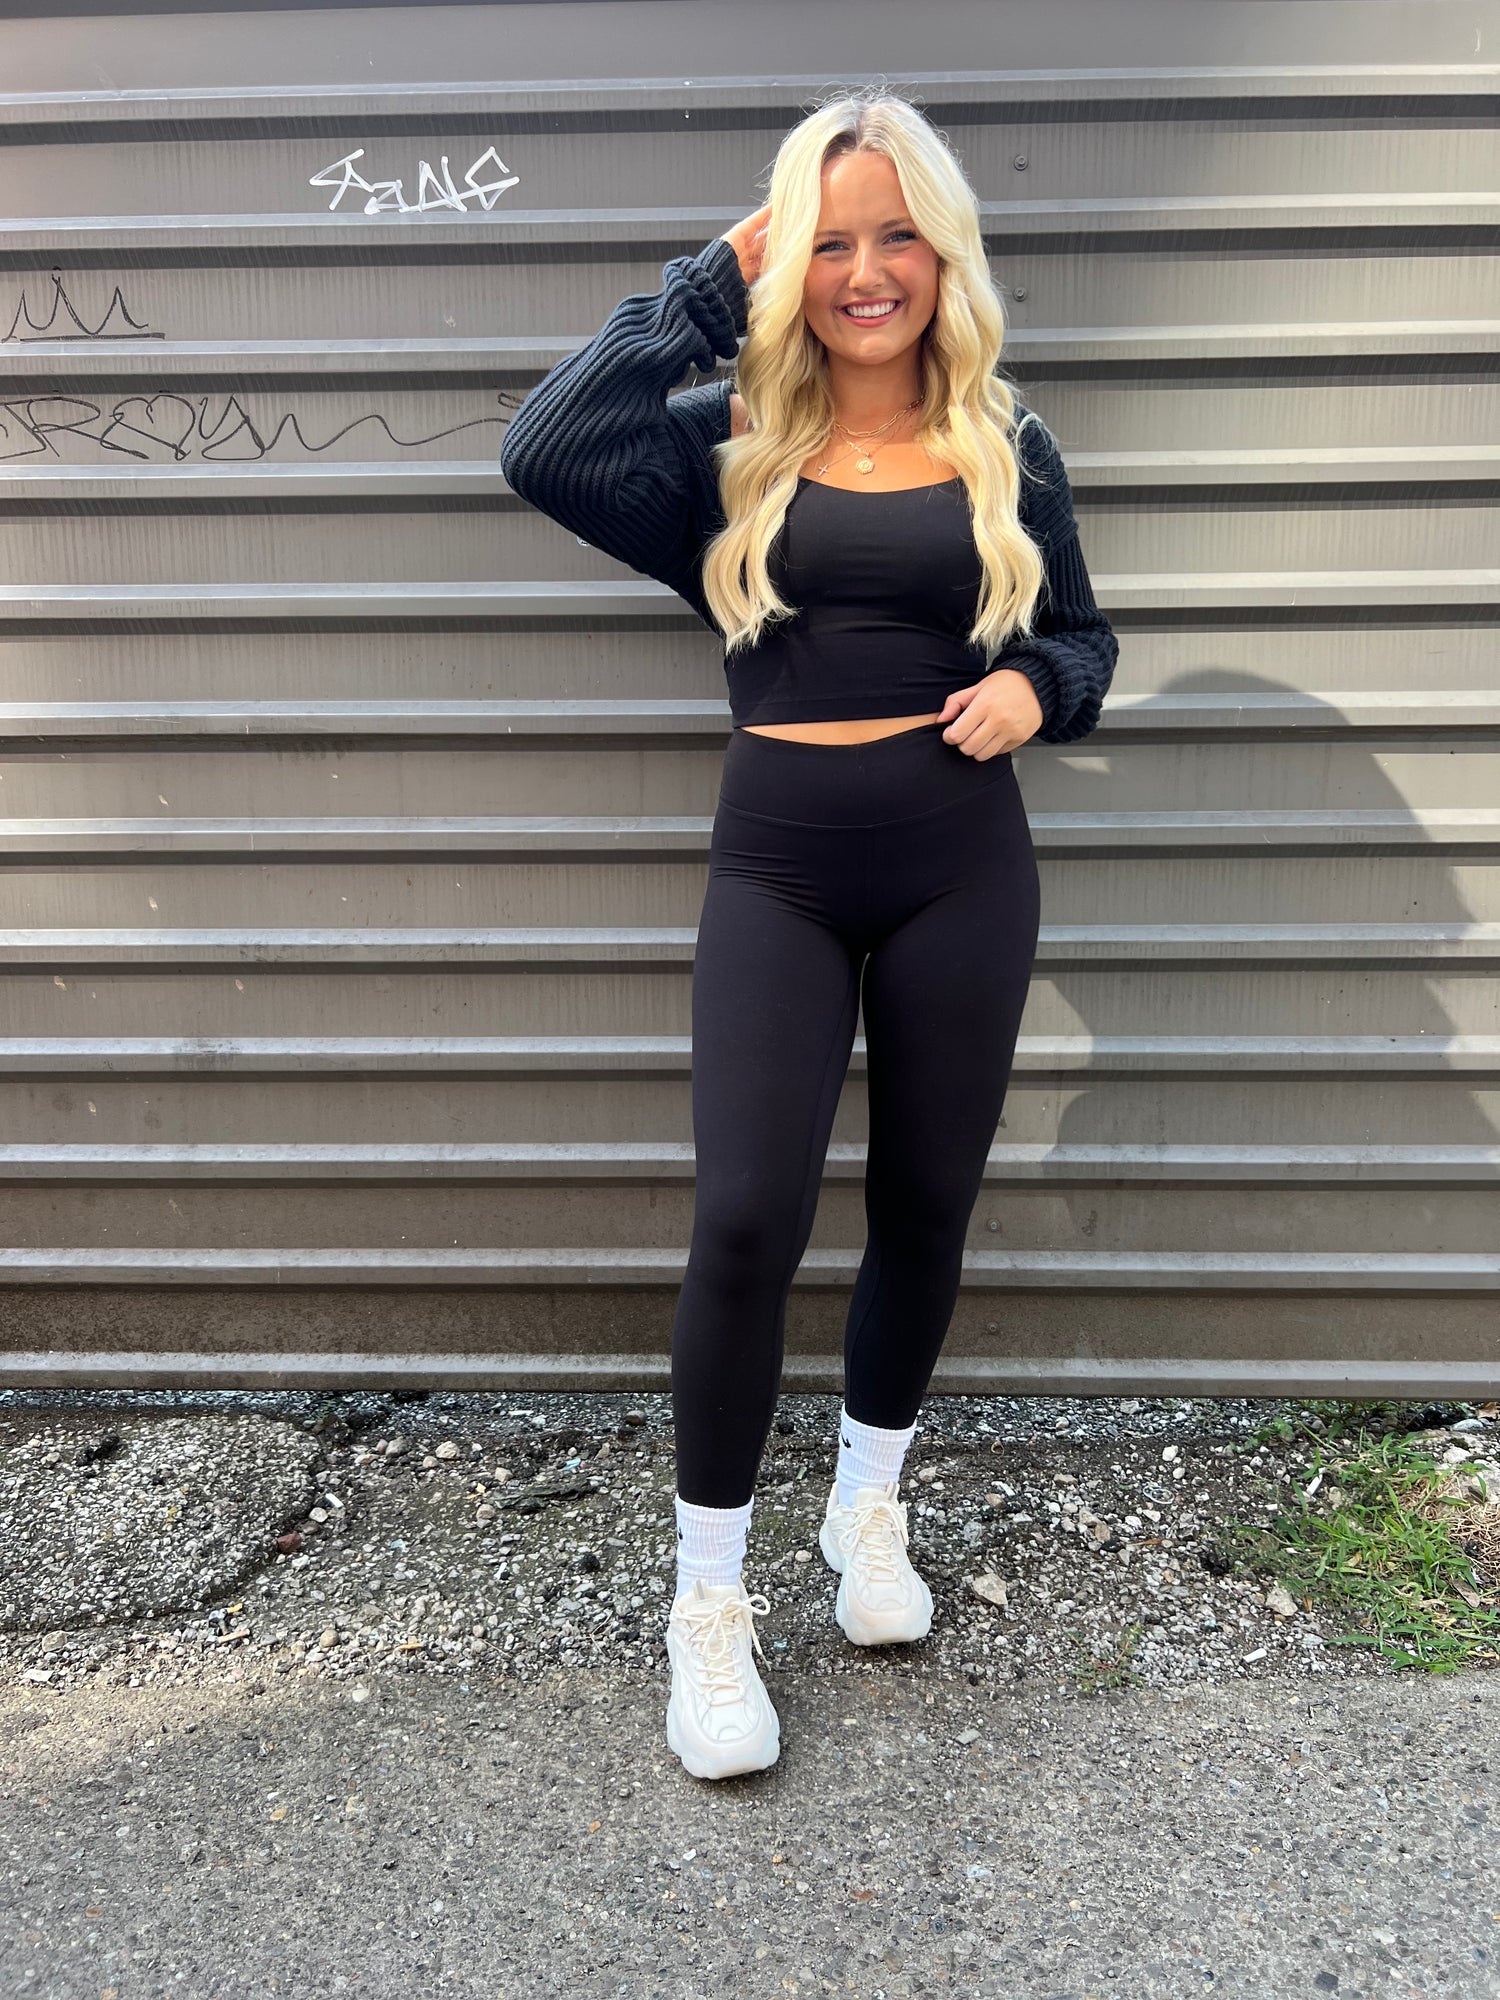 GOING STRONG BLACK WORK OUT LEGGINGS - THE HIP EAGLE BOUTIQUE